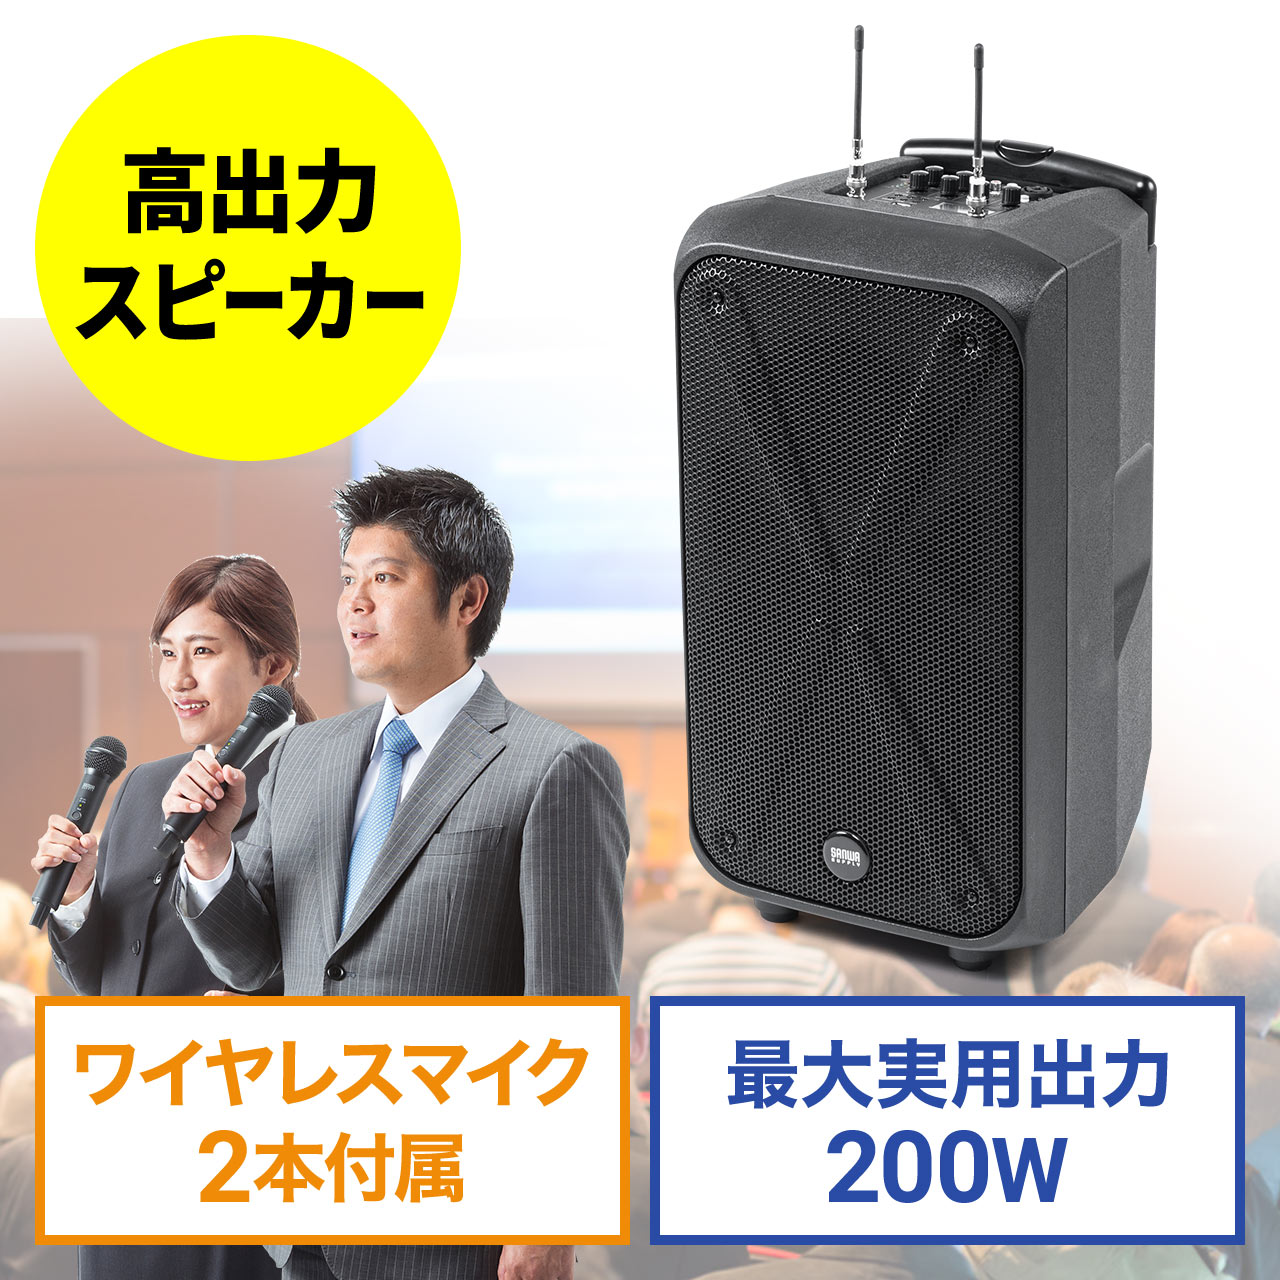 office 2019 Home & Business  二枚セットPC/タブレット